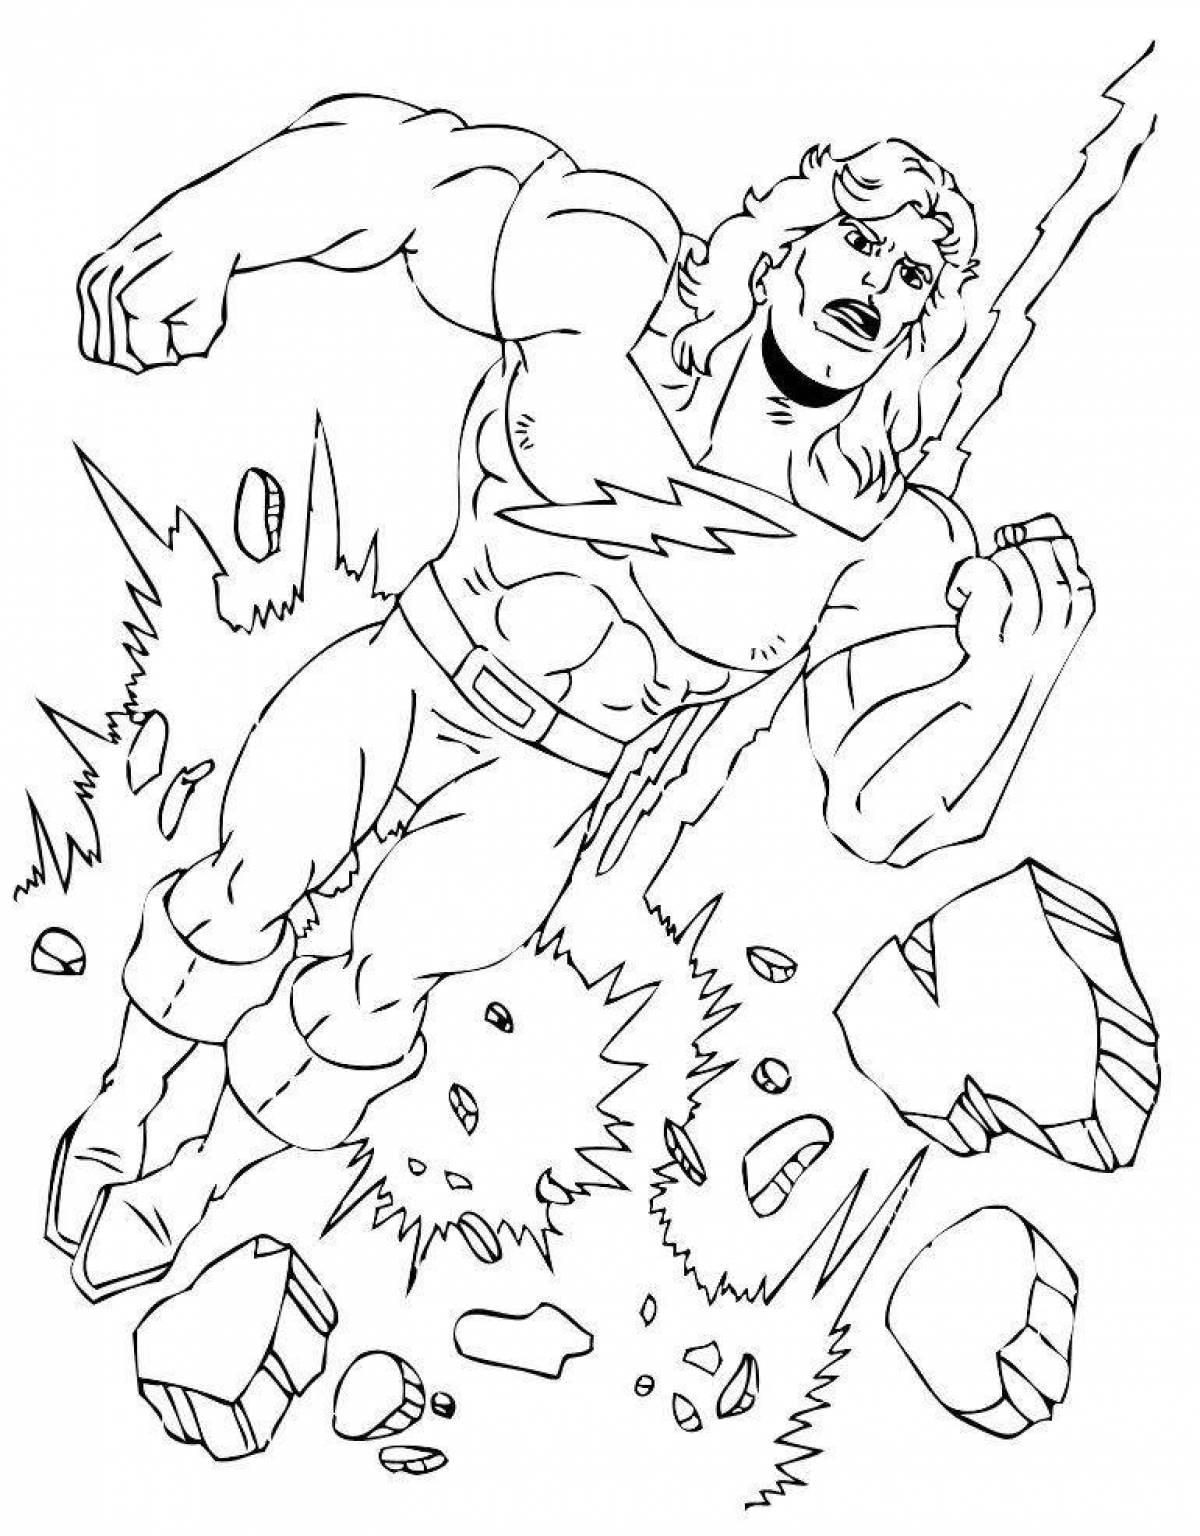 Irresistible Hulk coloring book for children 6-7 years old